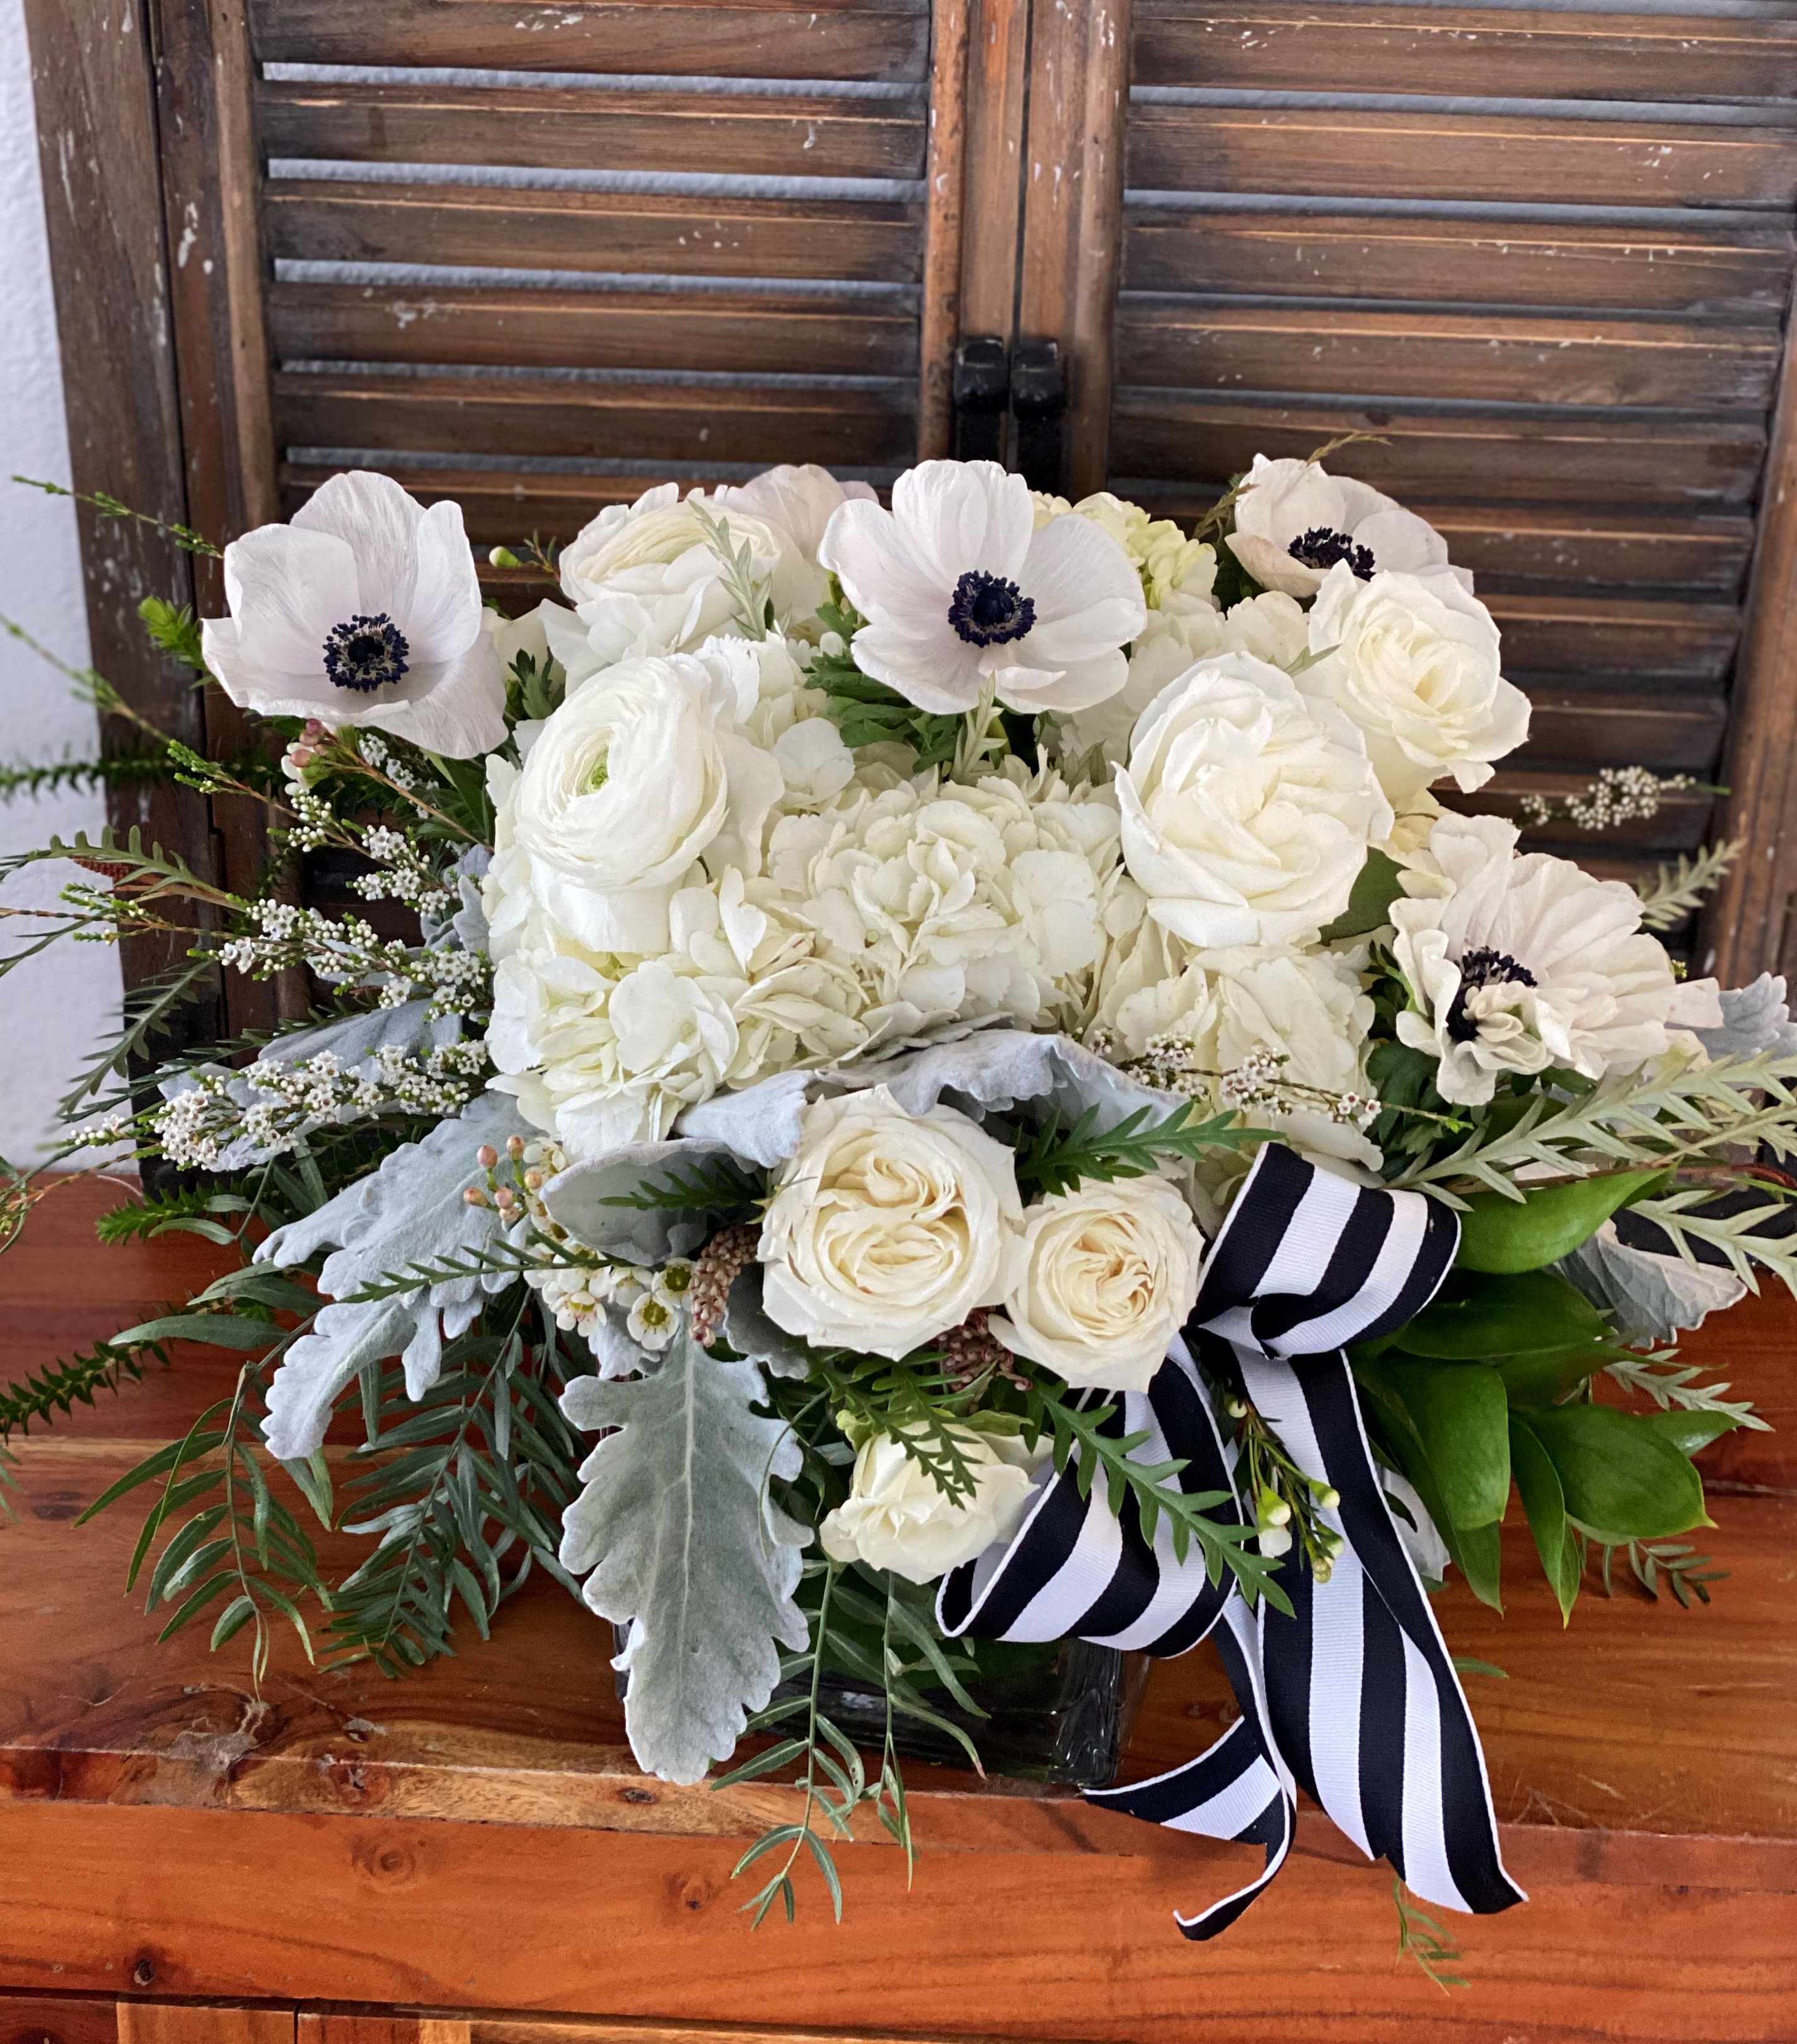 Black and white  - Amazing combinations of anemones,  ranunculus, and exquisite  roses. 